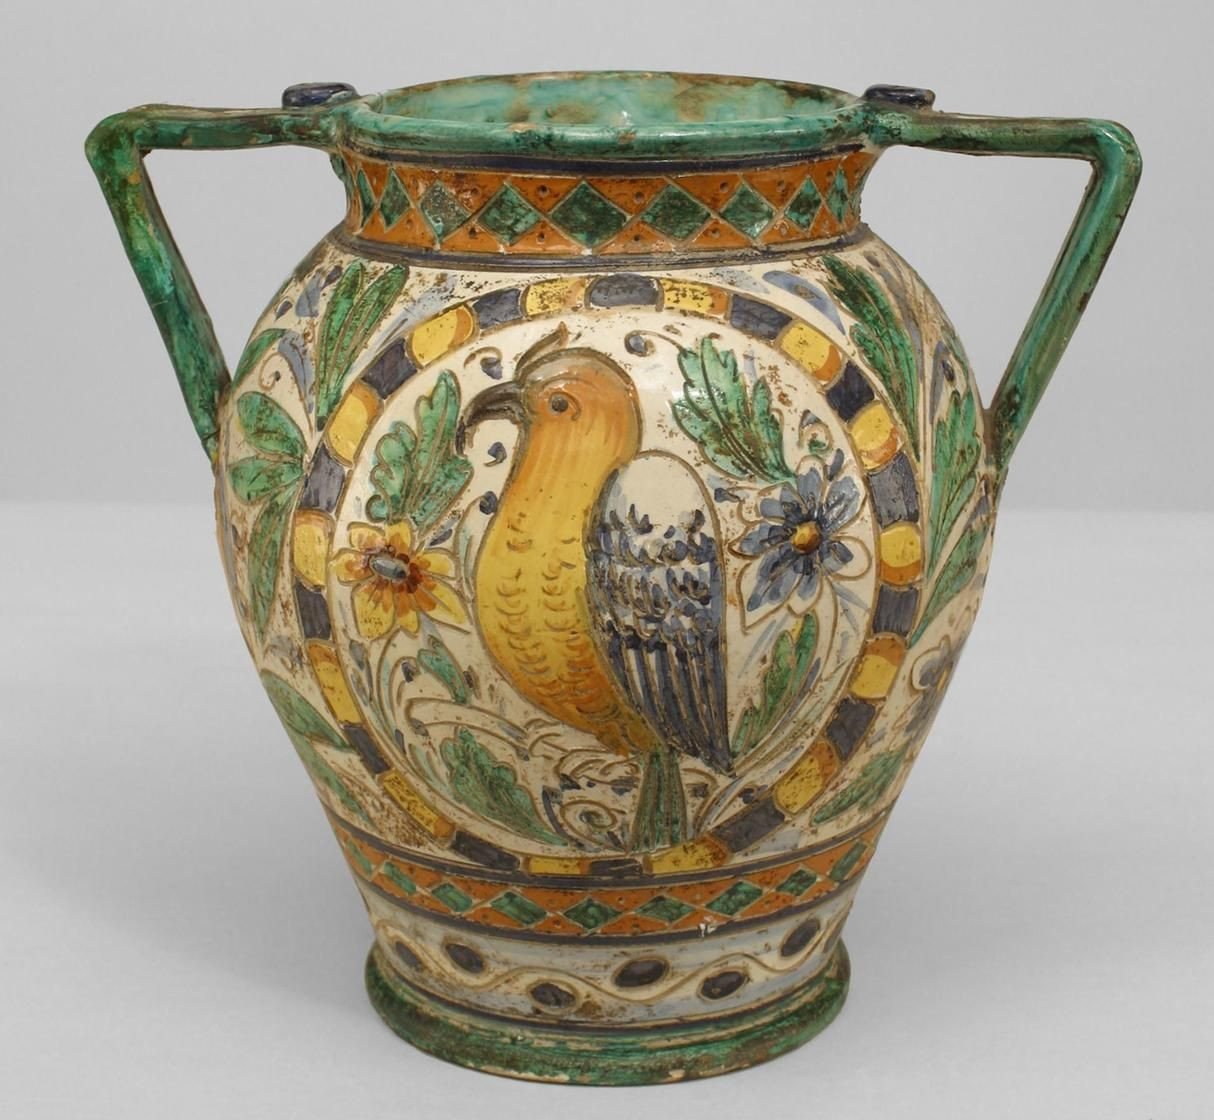 26 Lovable Moroccan Ceramic Vase 2024 free download moroccan ceramic vase of i purchased a large spanish ewer pitcher in similar design recently regarding i purchased a large spanish ewer pitcher in similar design recently at an amazing estat